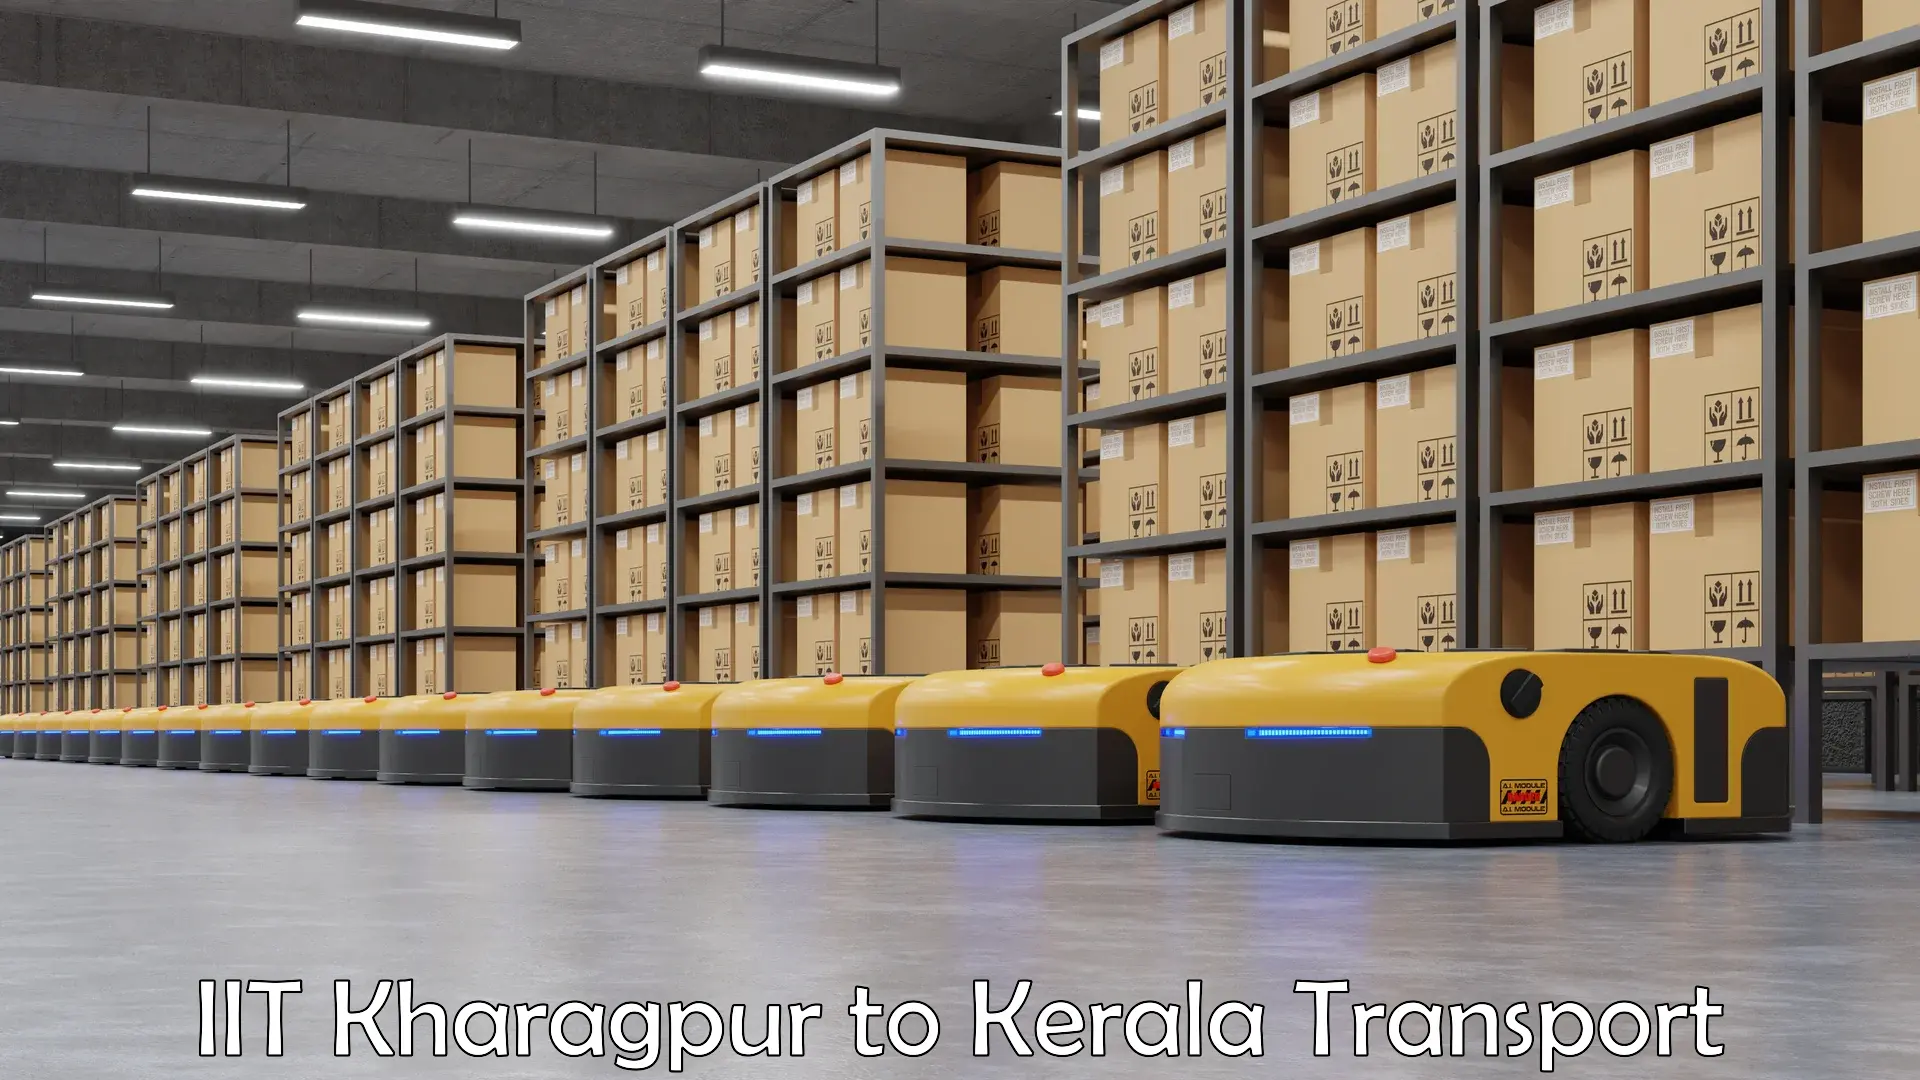 Container transport service IIT Kharagpur to Changanacherry